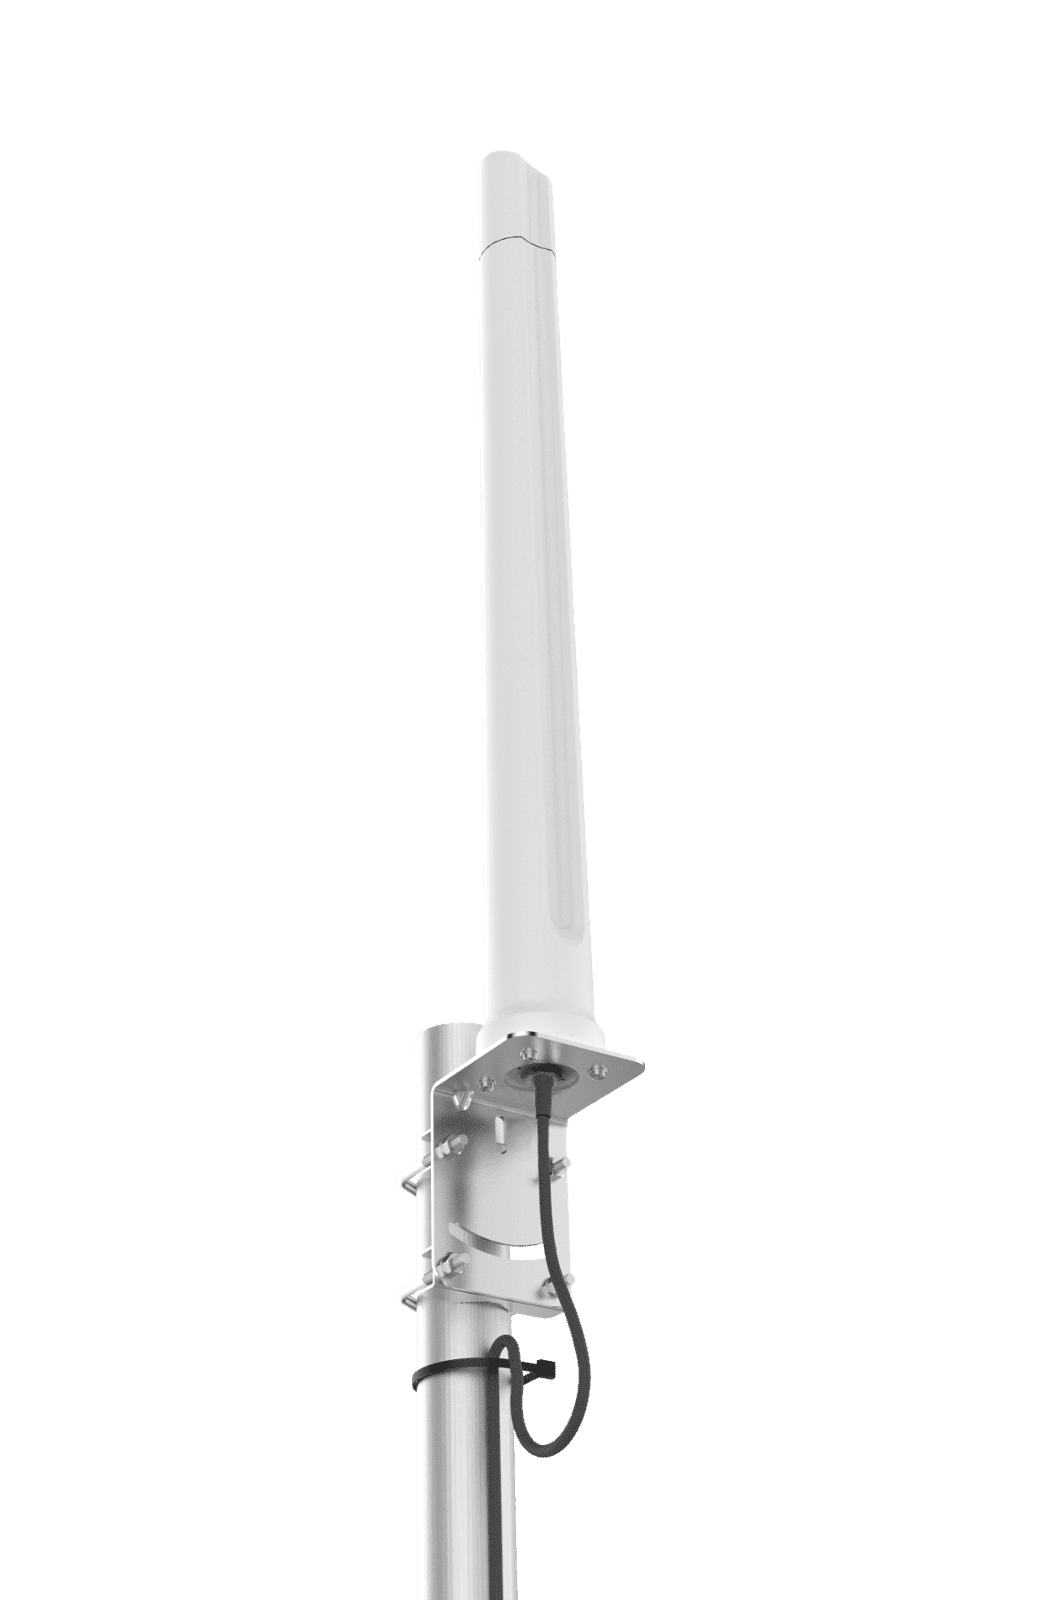  An omni antenna is easier to install than a directional antenna and it does not require realignment/adjustment when the network changes